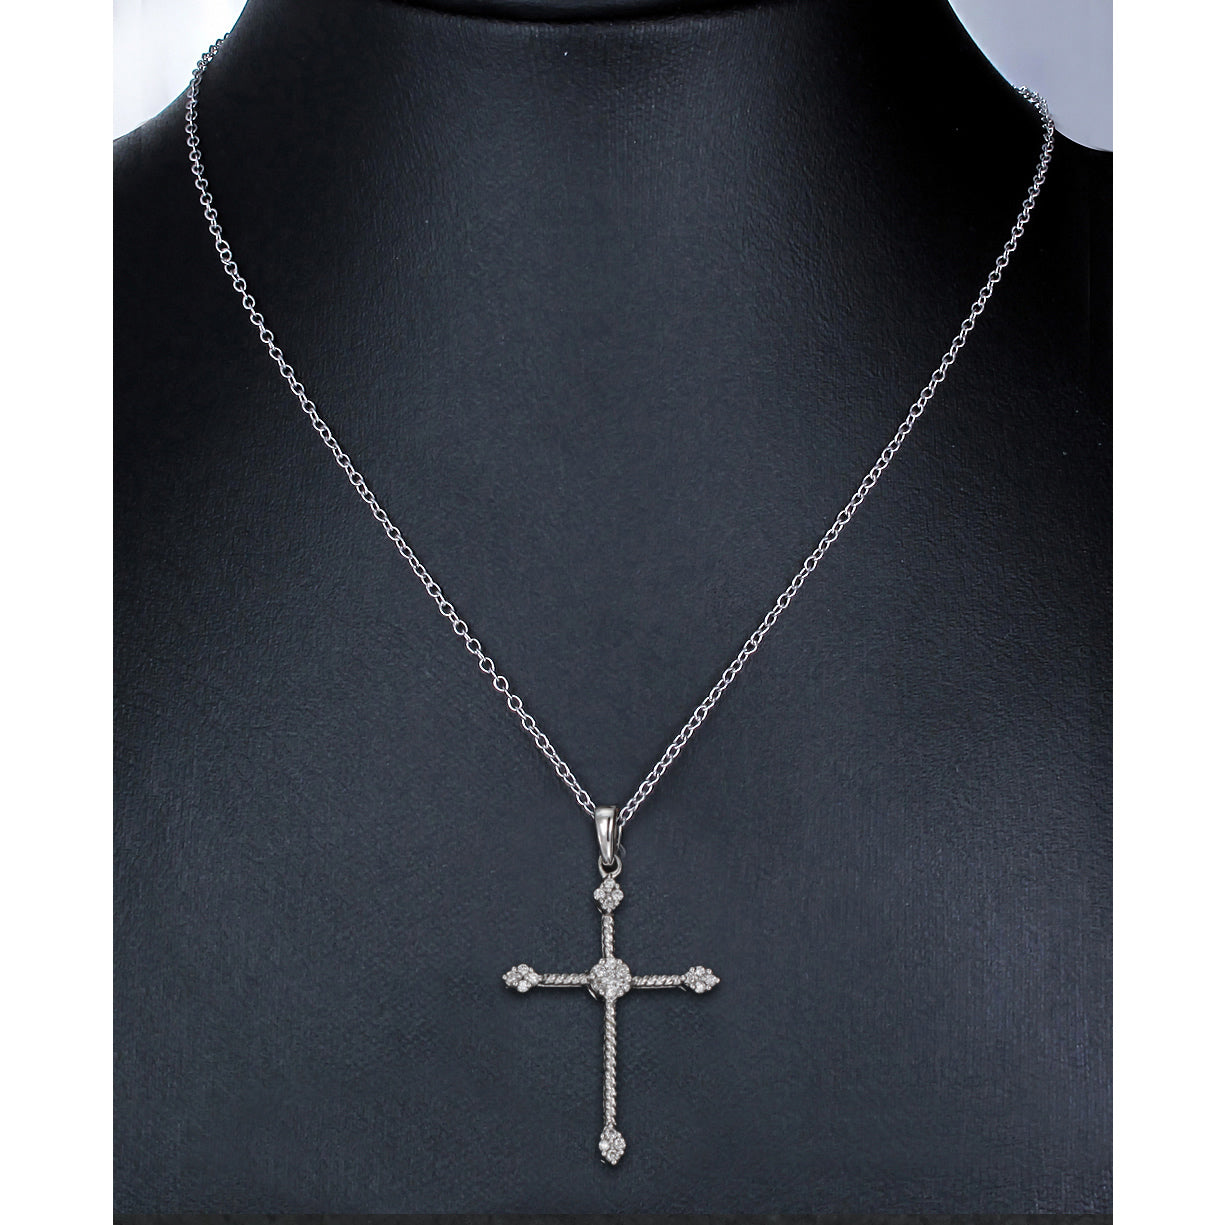 1/4 cttw Diamond Pendant, Diamond Cross Pendant Necklace for Women in 14K White Gold with 18 Inch Chain, Prong Setting